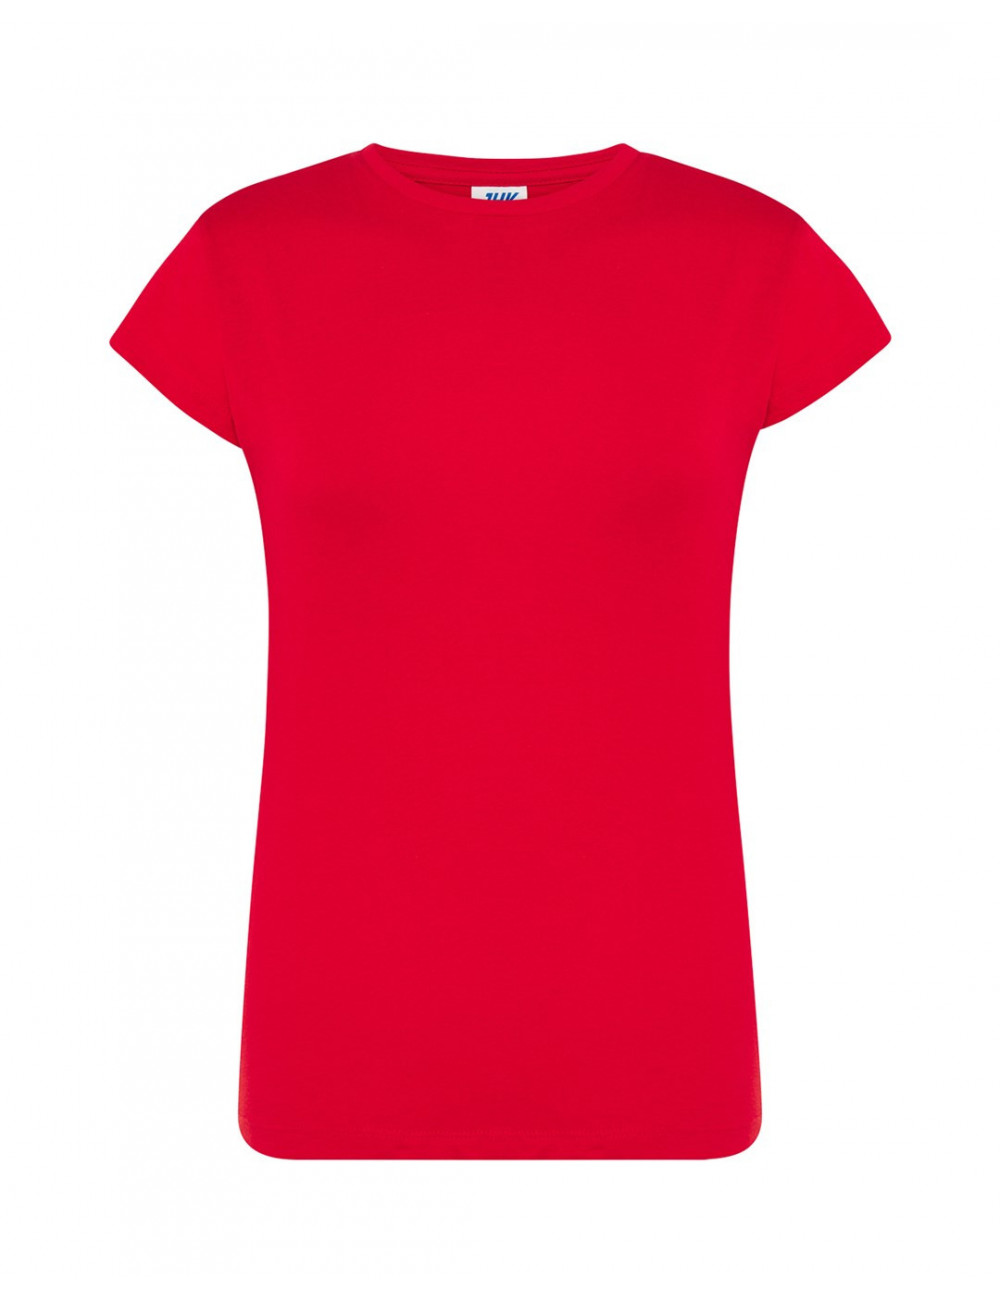 T-shirt for women tsrl cmf lady comfort red Jhk